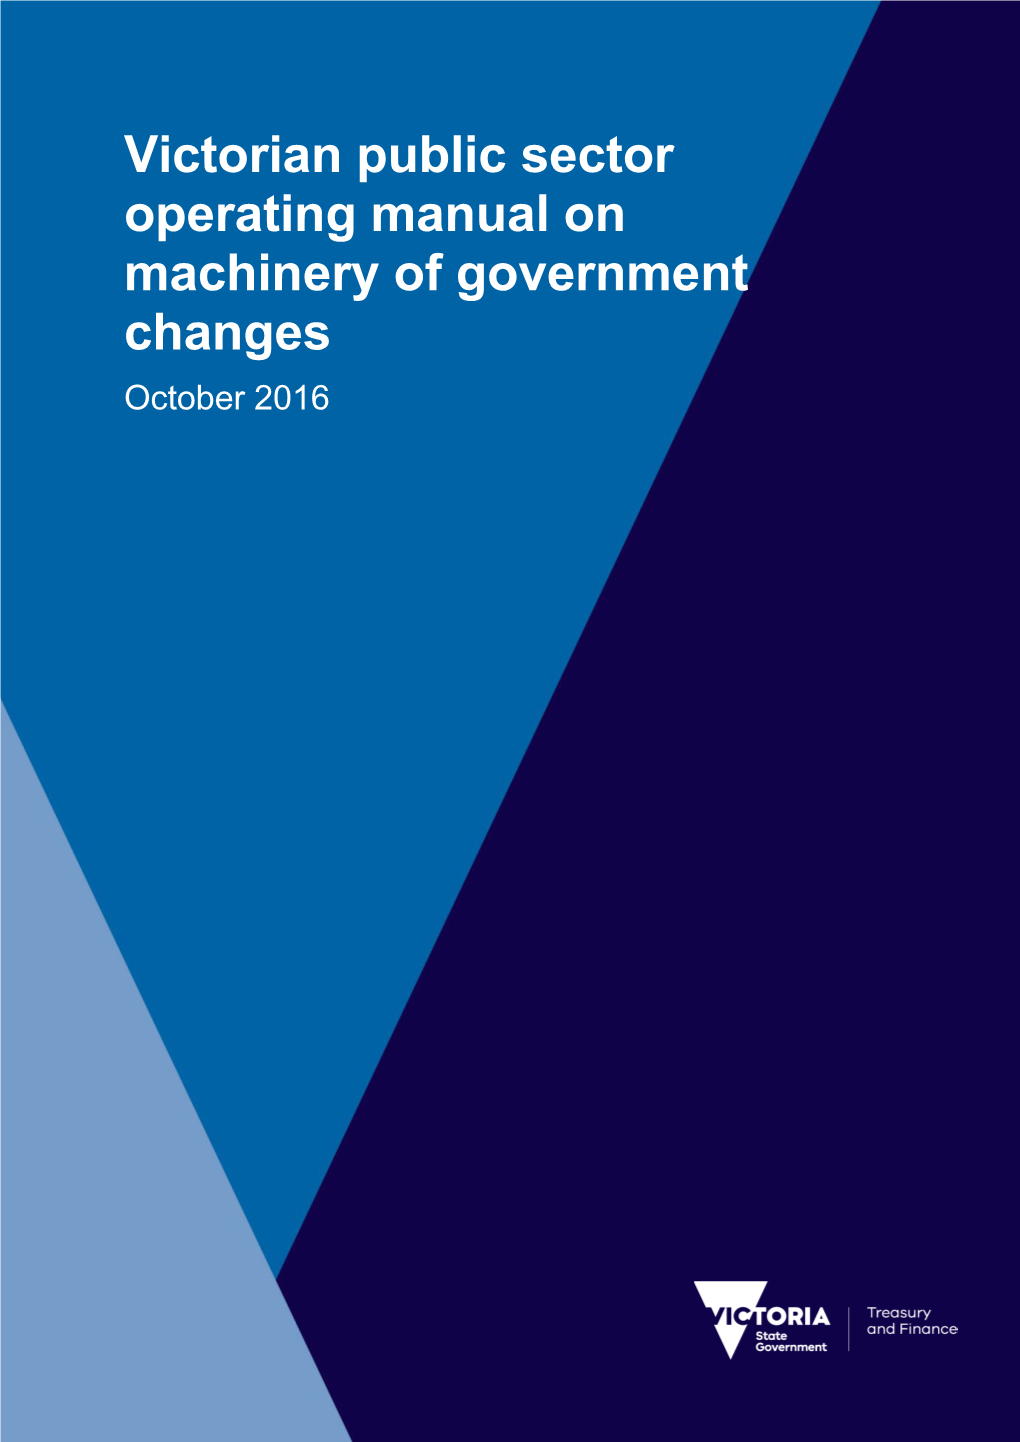 Victorian Public Sector Operating Manual on Machinery of Government Changes October 2016